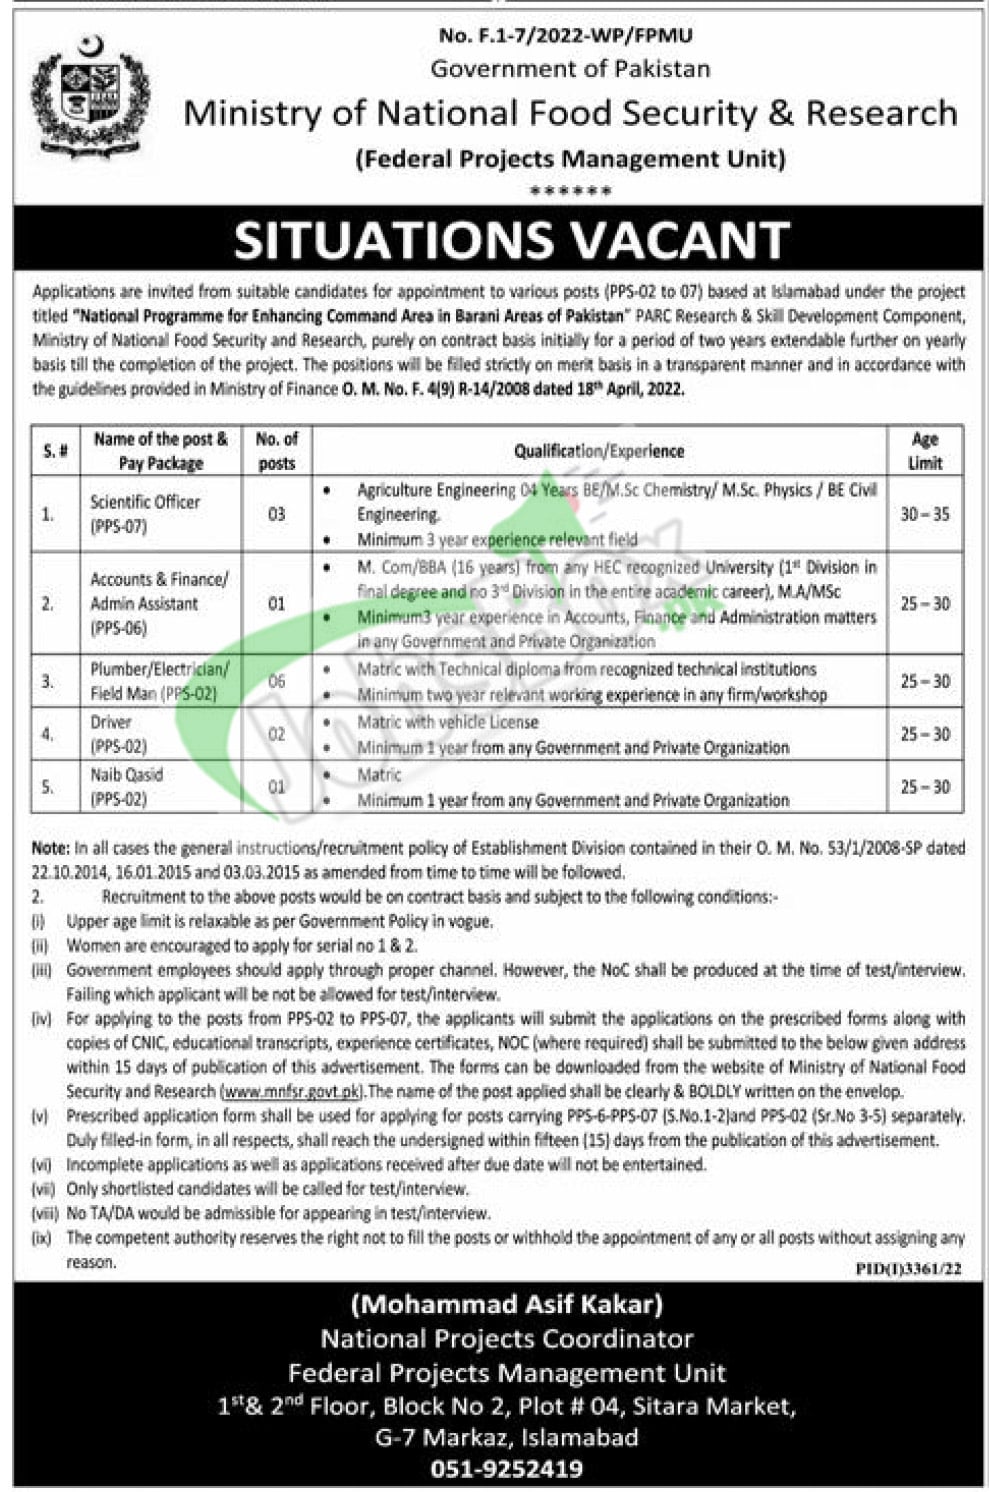 National Food Security and Research Ministry Jobs 2022 - Download Form from MNFSR website